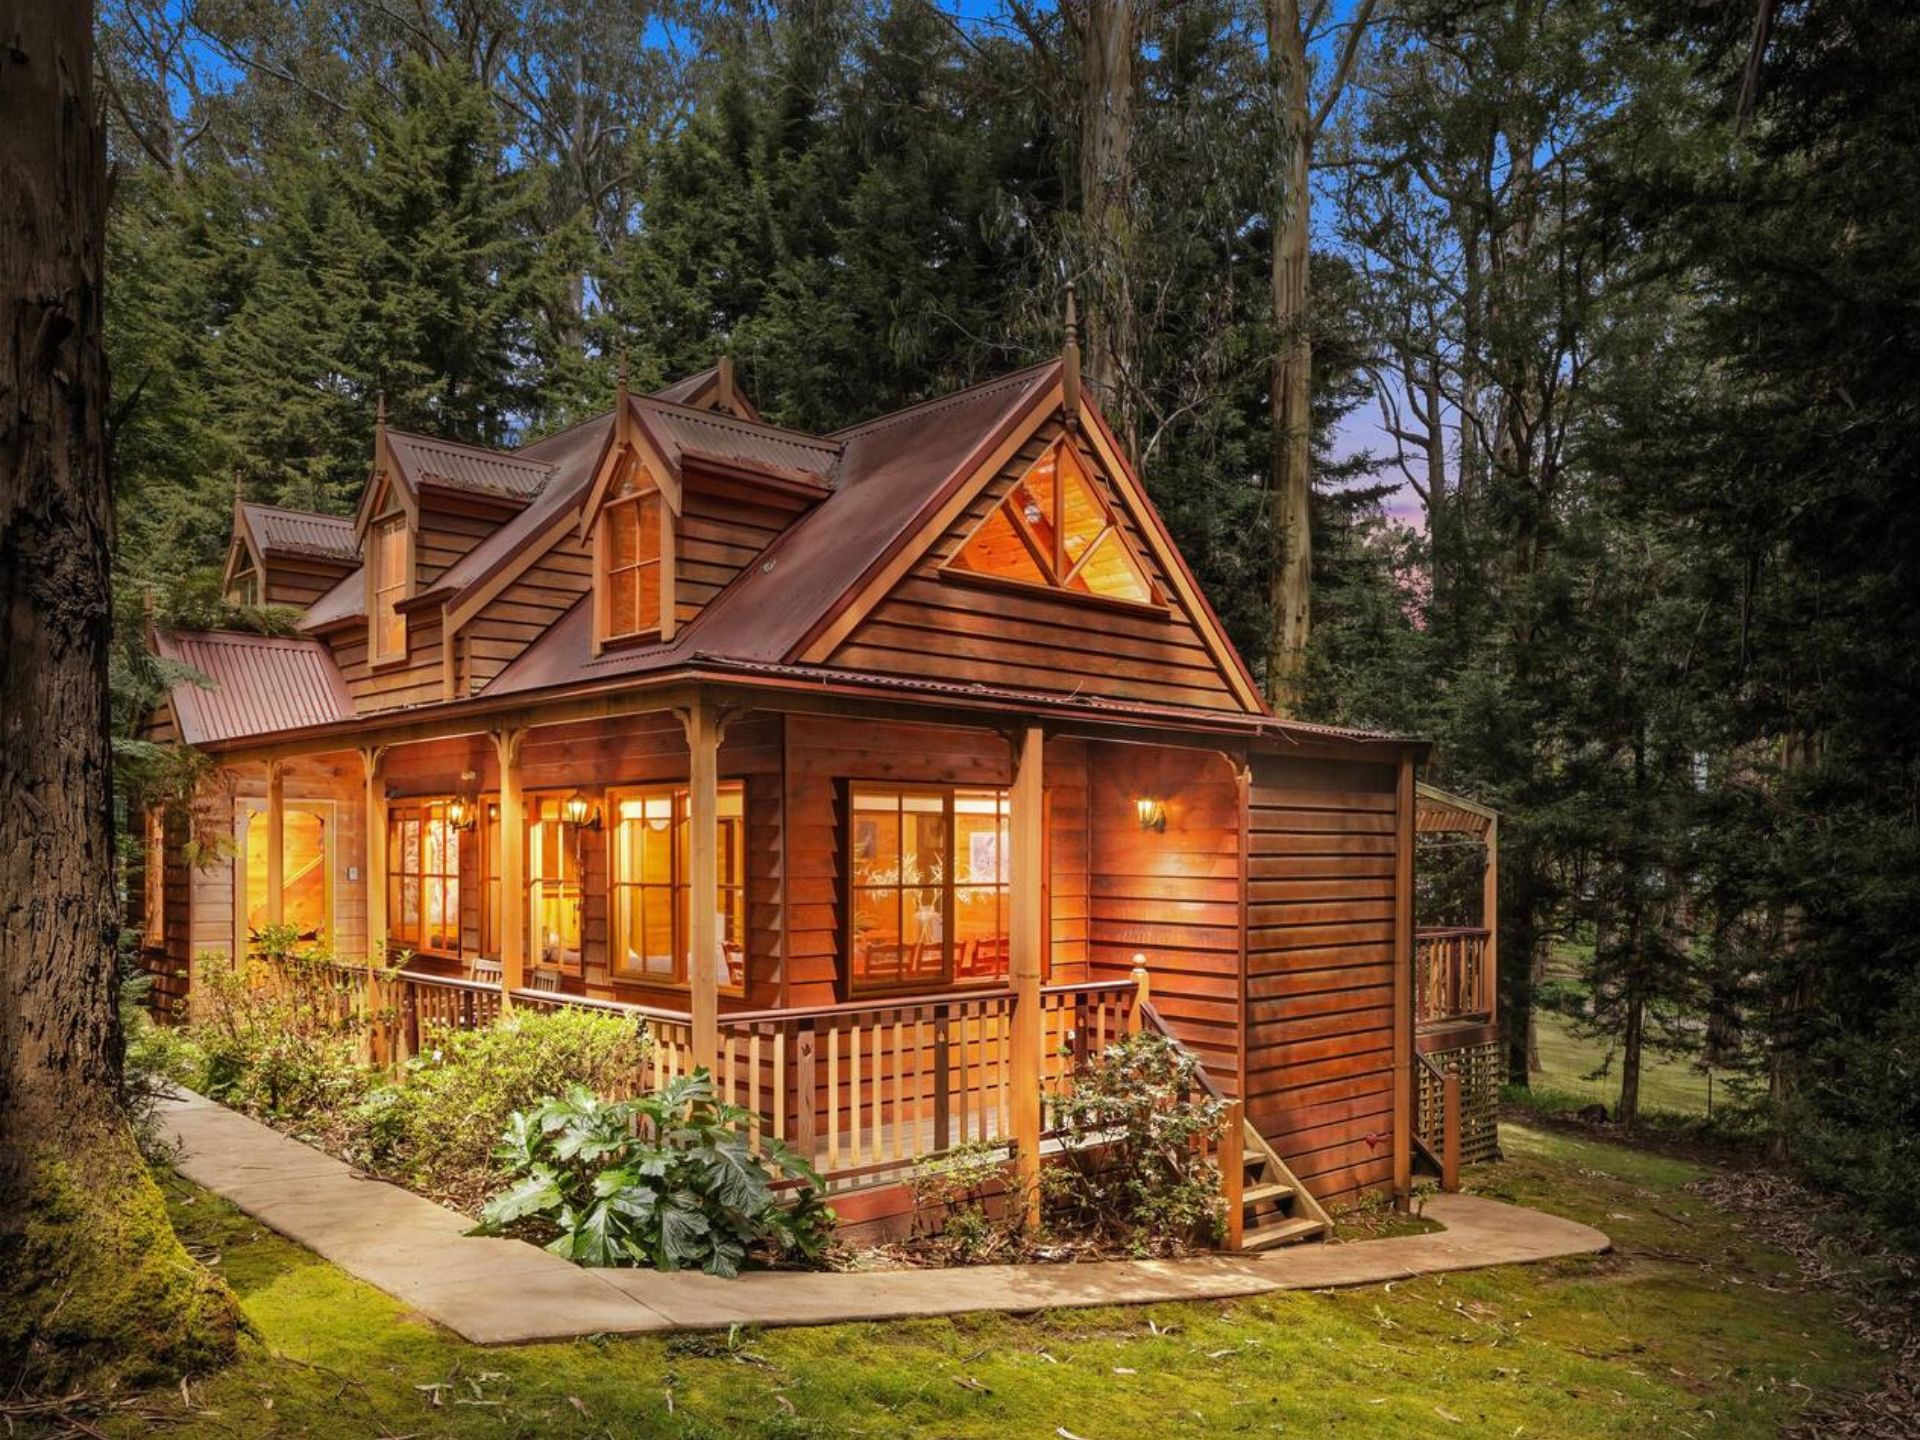 Wooden cottage in the forest, surrounded by tall trees